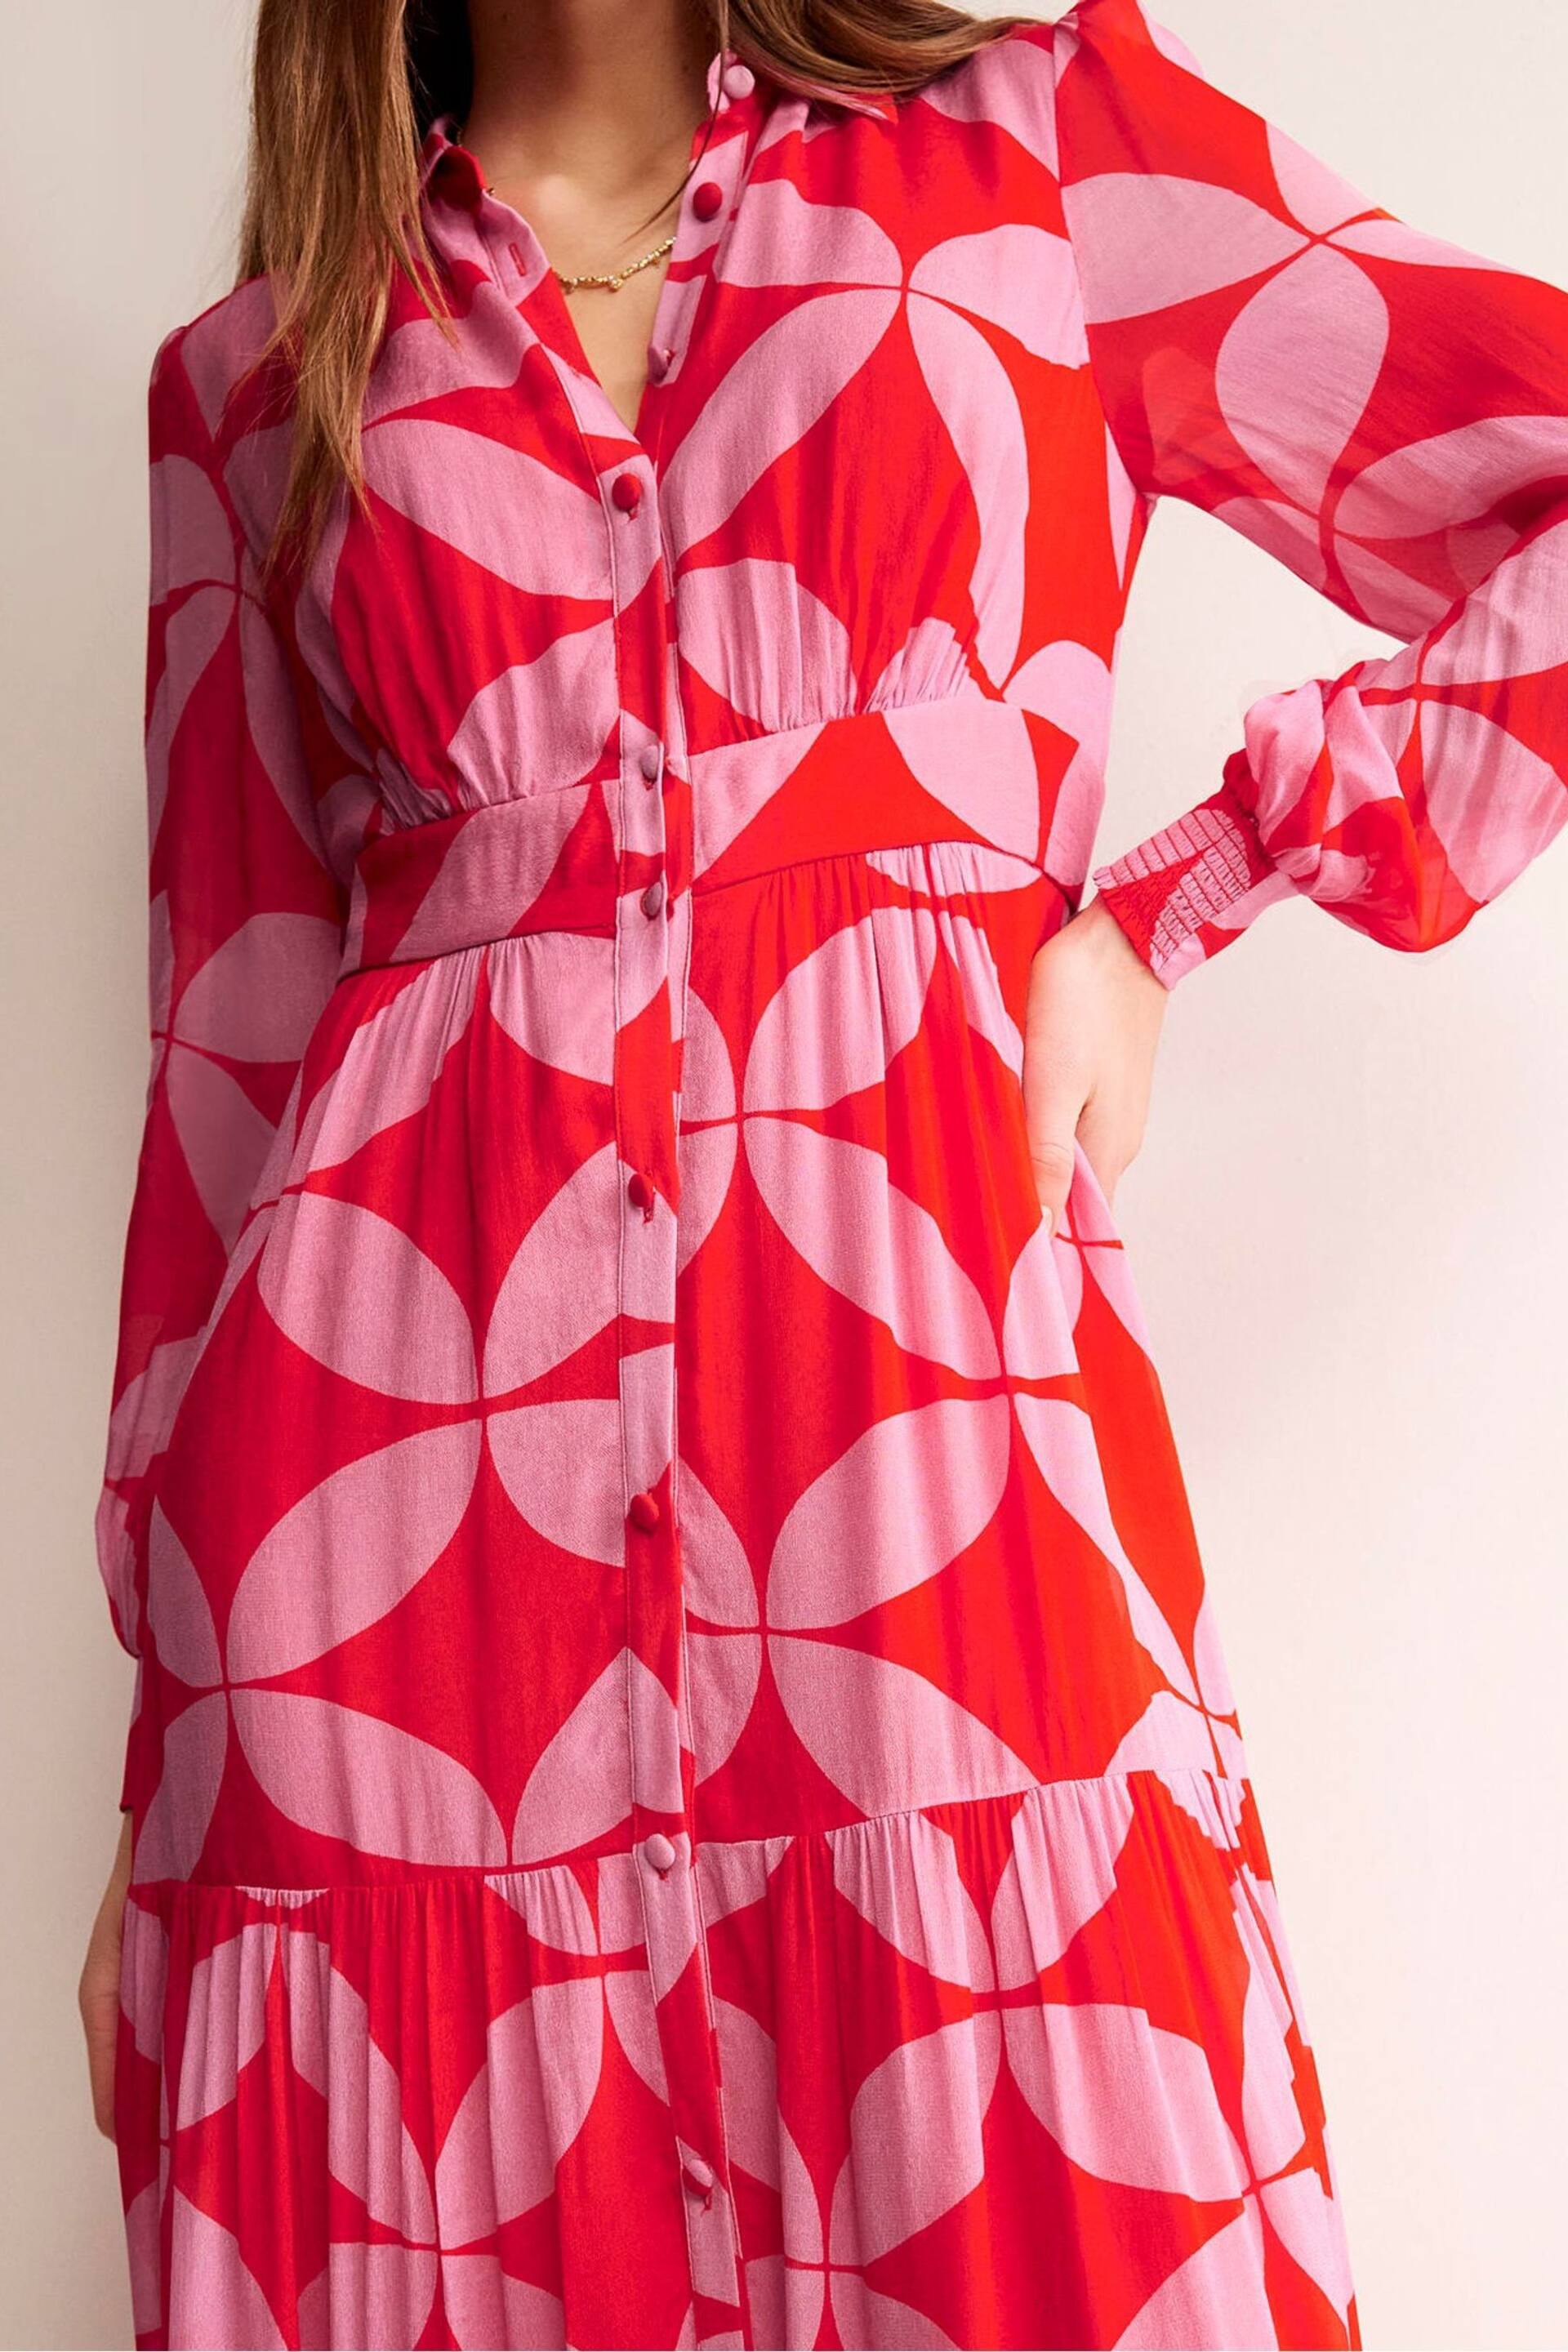 Boden Red Occasion Maxi Shirt Dress - Image 3 of 6